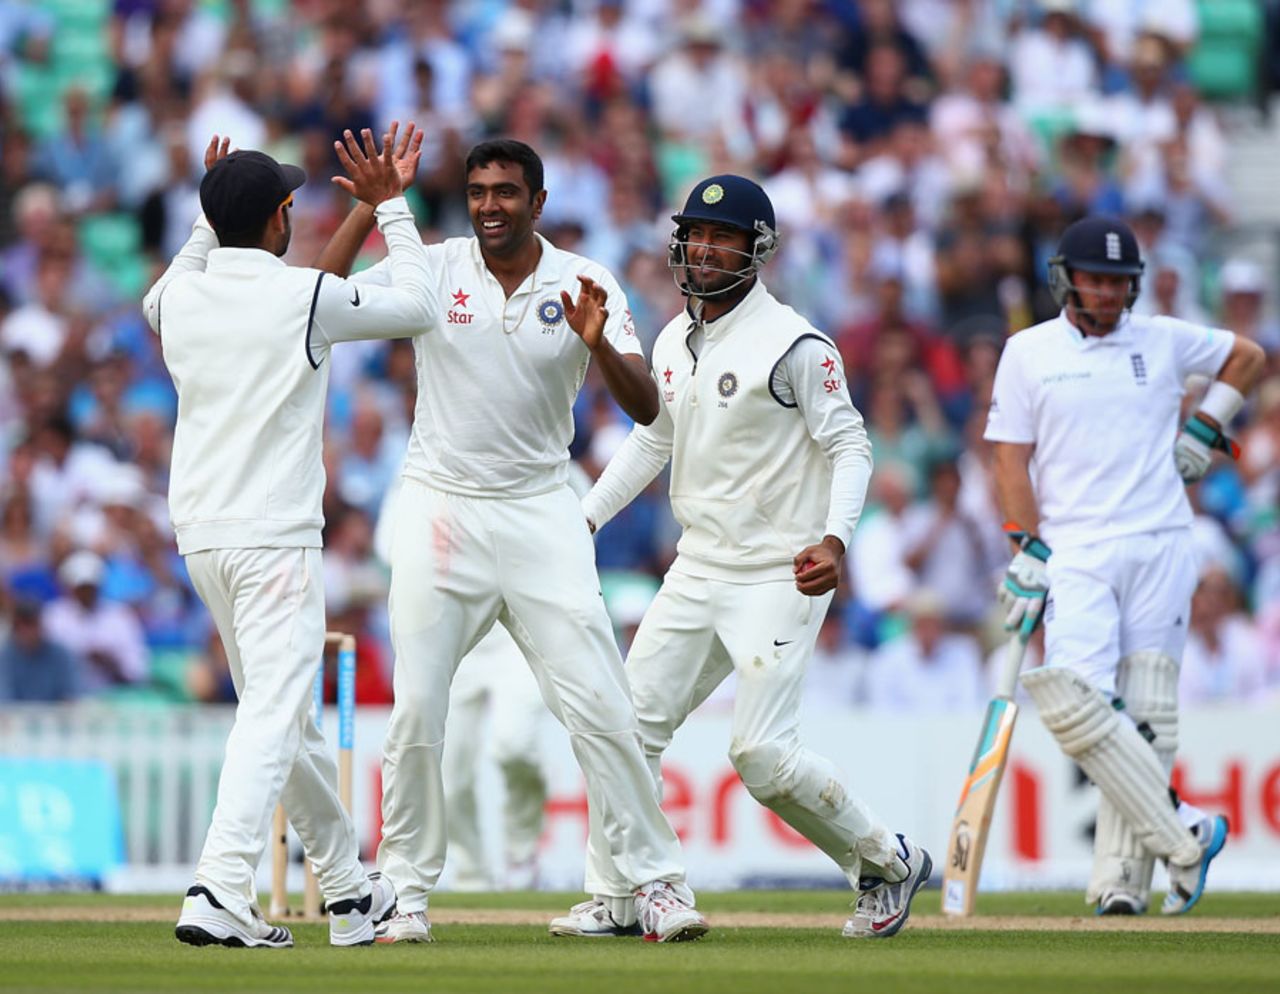 R Ashwin ended a two-year drought for a wicket overseas, England v India, 5th Investec Test, The Oval, 2nd day, August 16, 2014